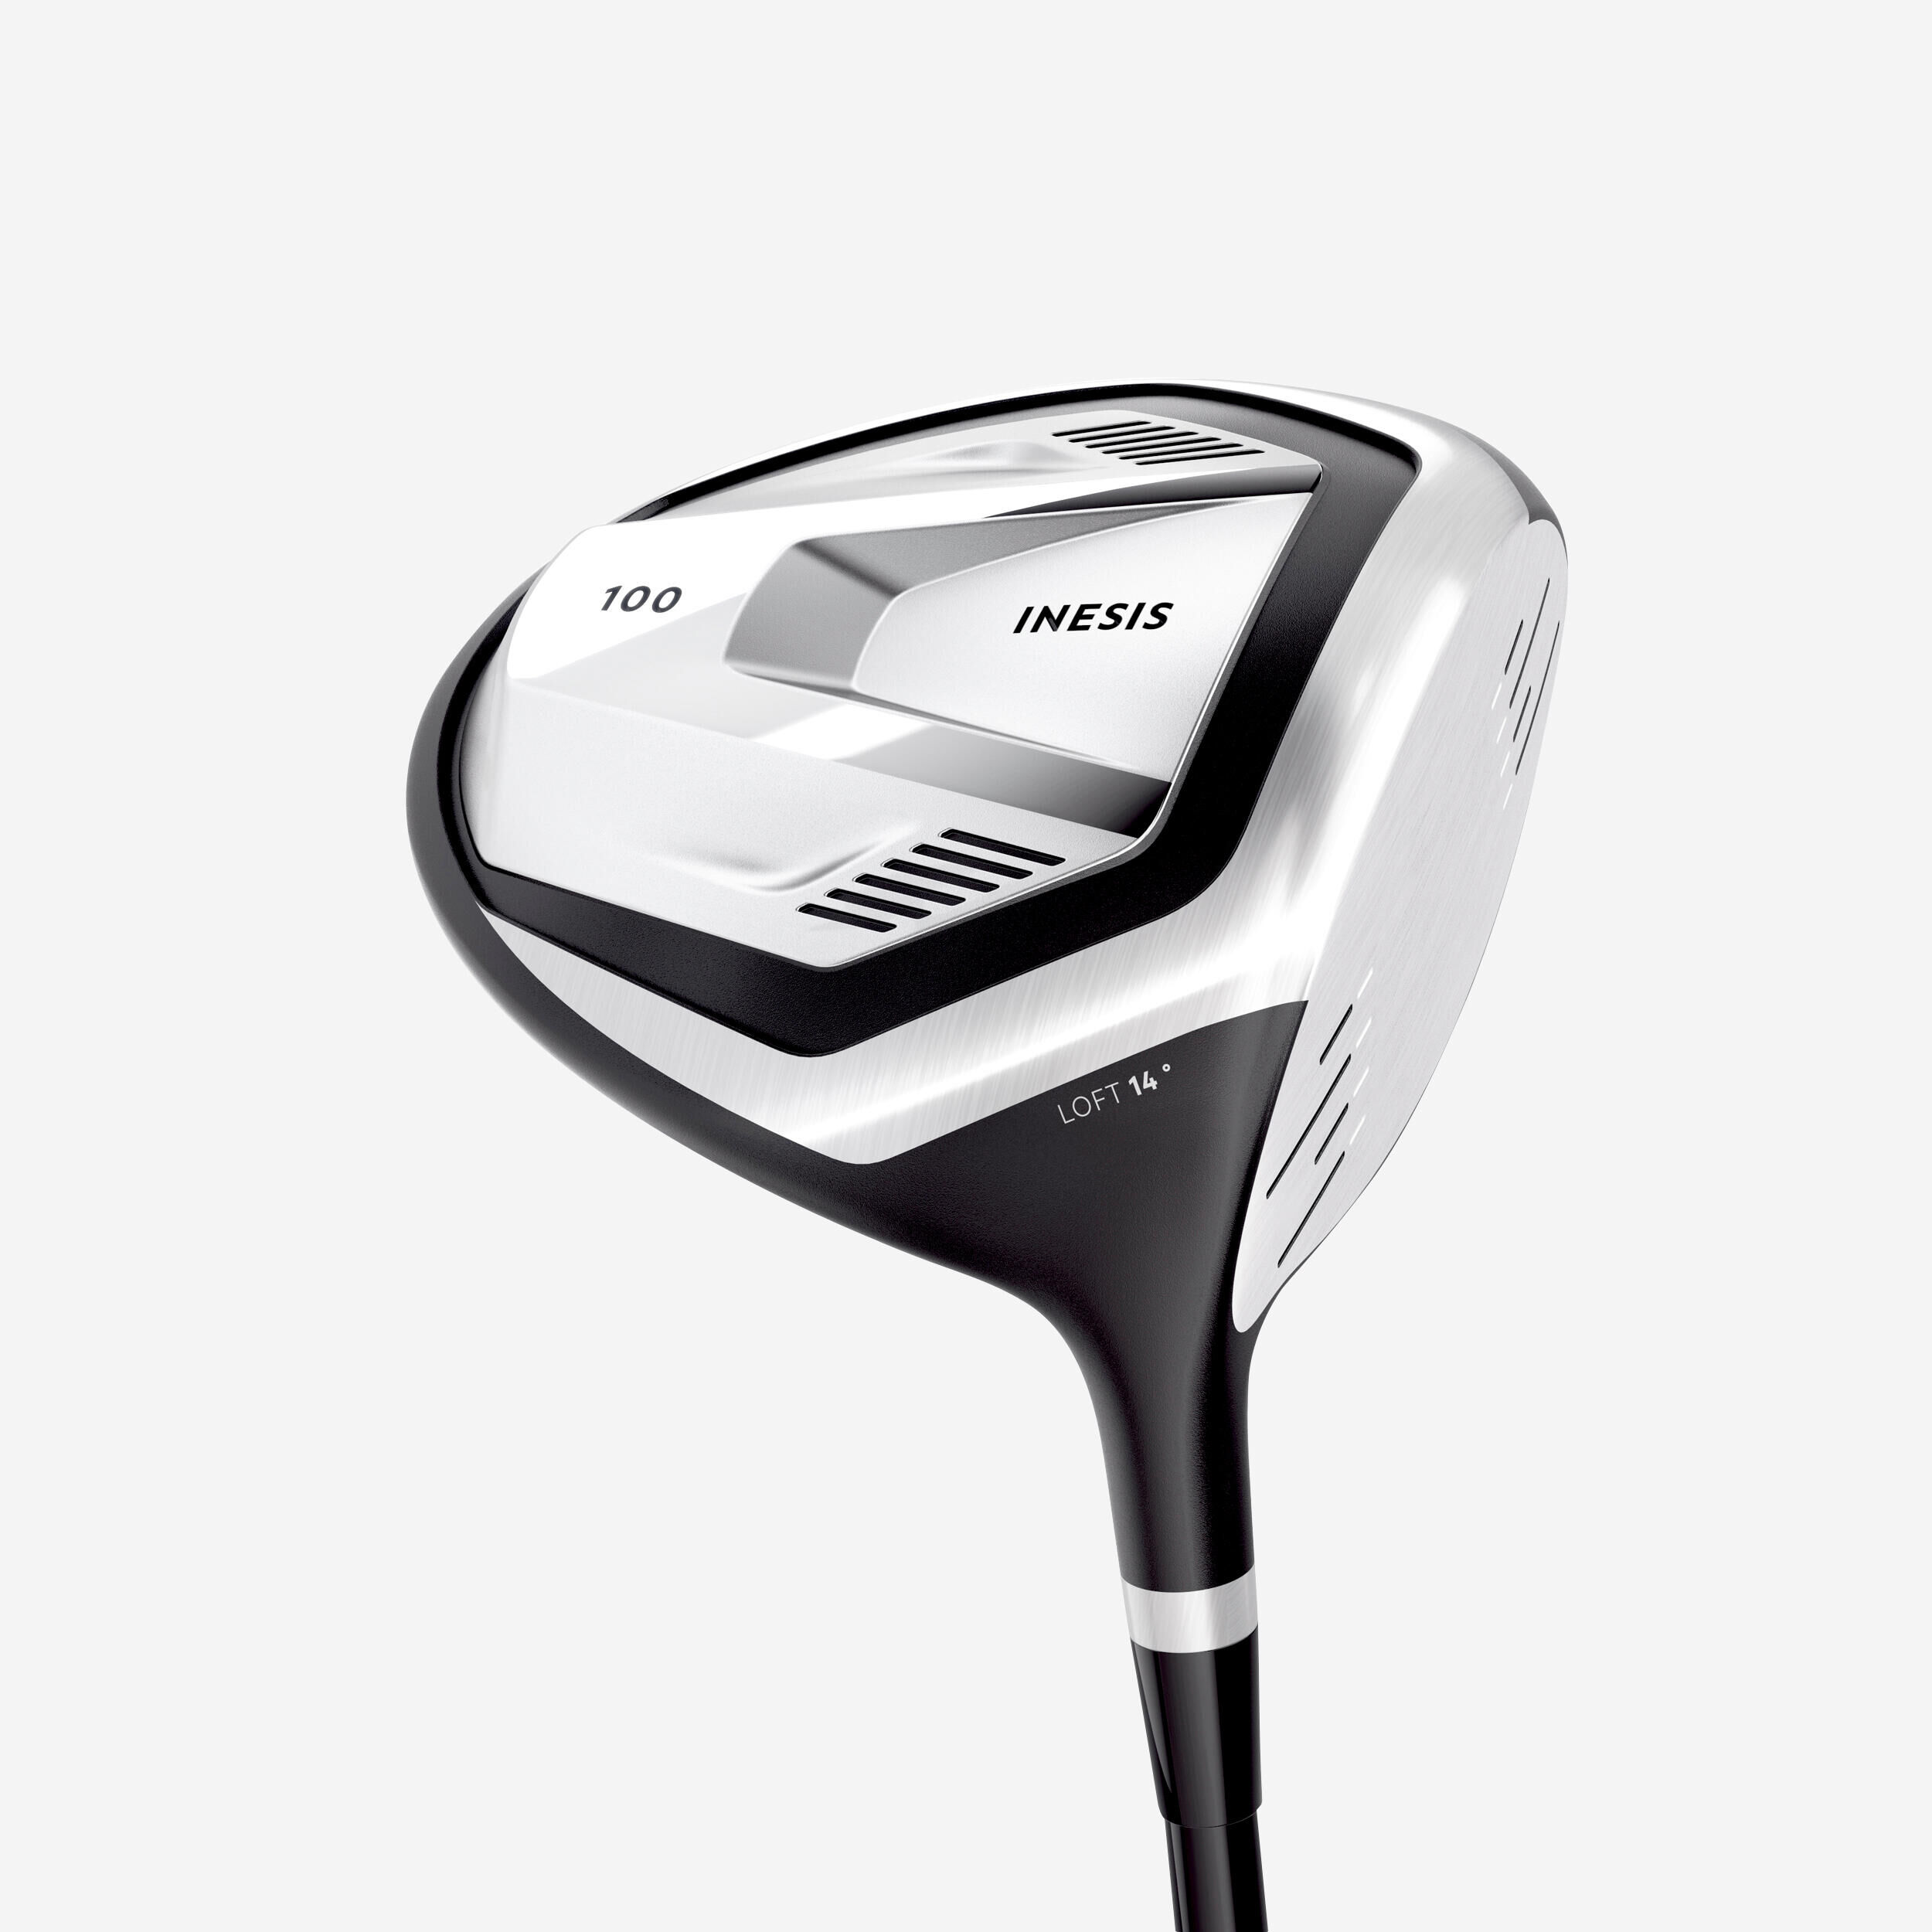 INESIS Golf driver right handed graphite - INESIS 100